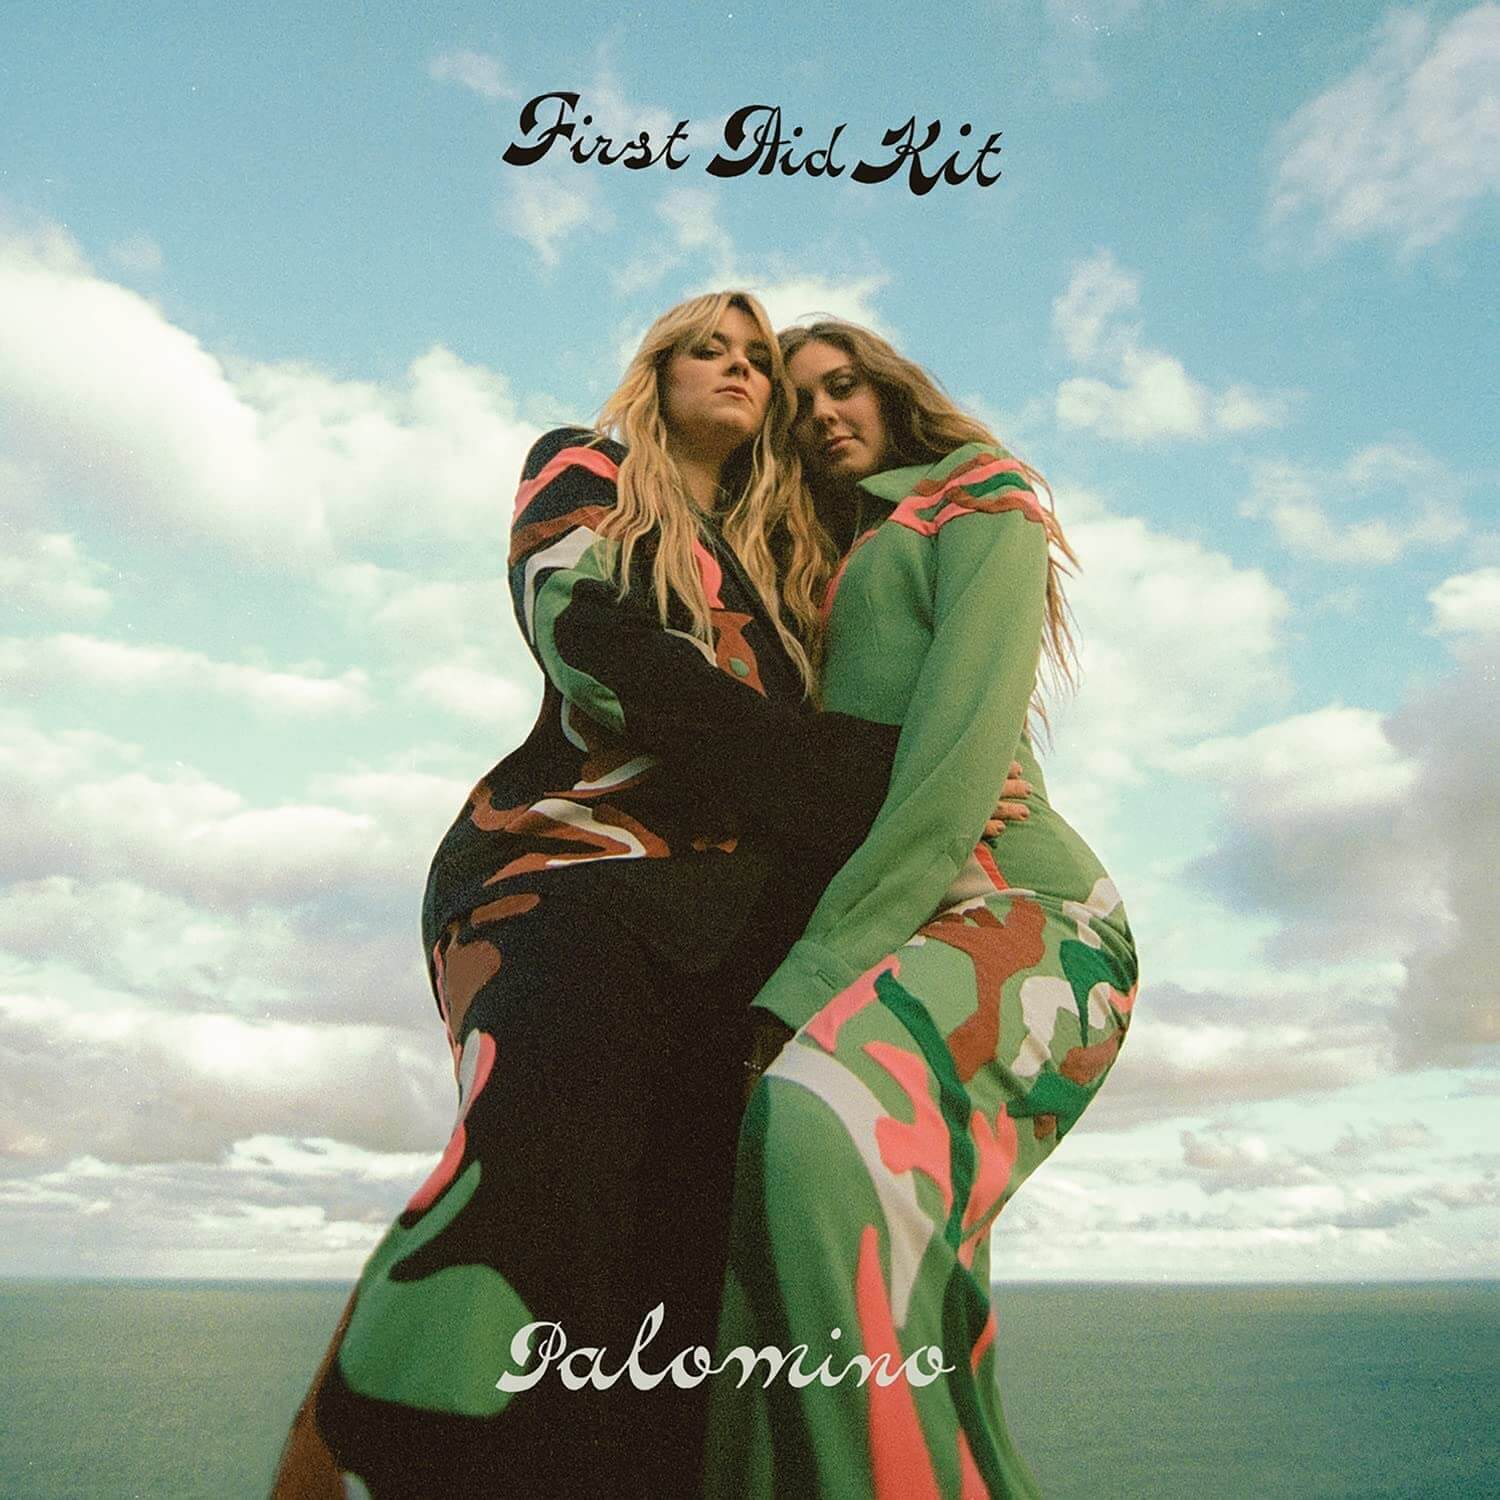 Palomino by First Aid Kit album review by Robert Boissonneault for Northern Transmissions